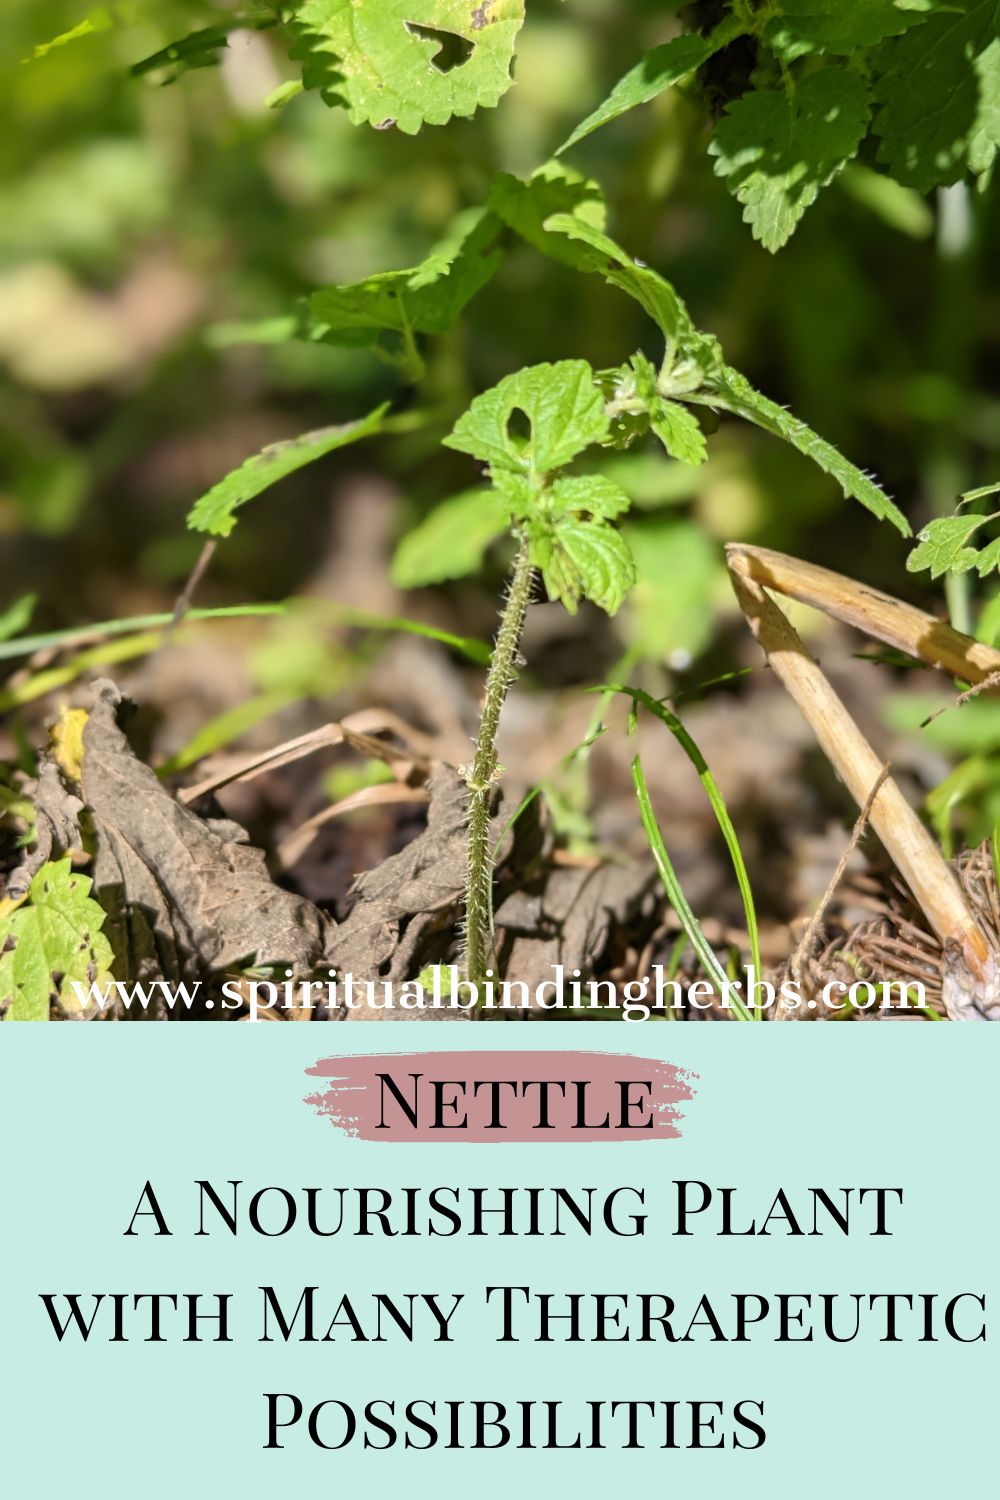 Nettle – A Nourishing Plant and Its Therapeutic Possibilities